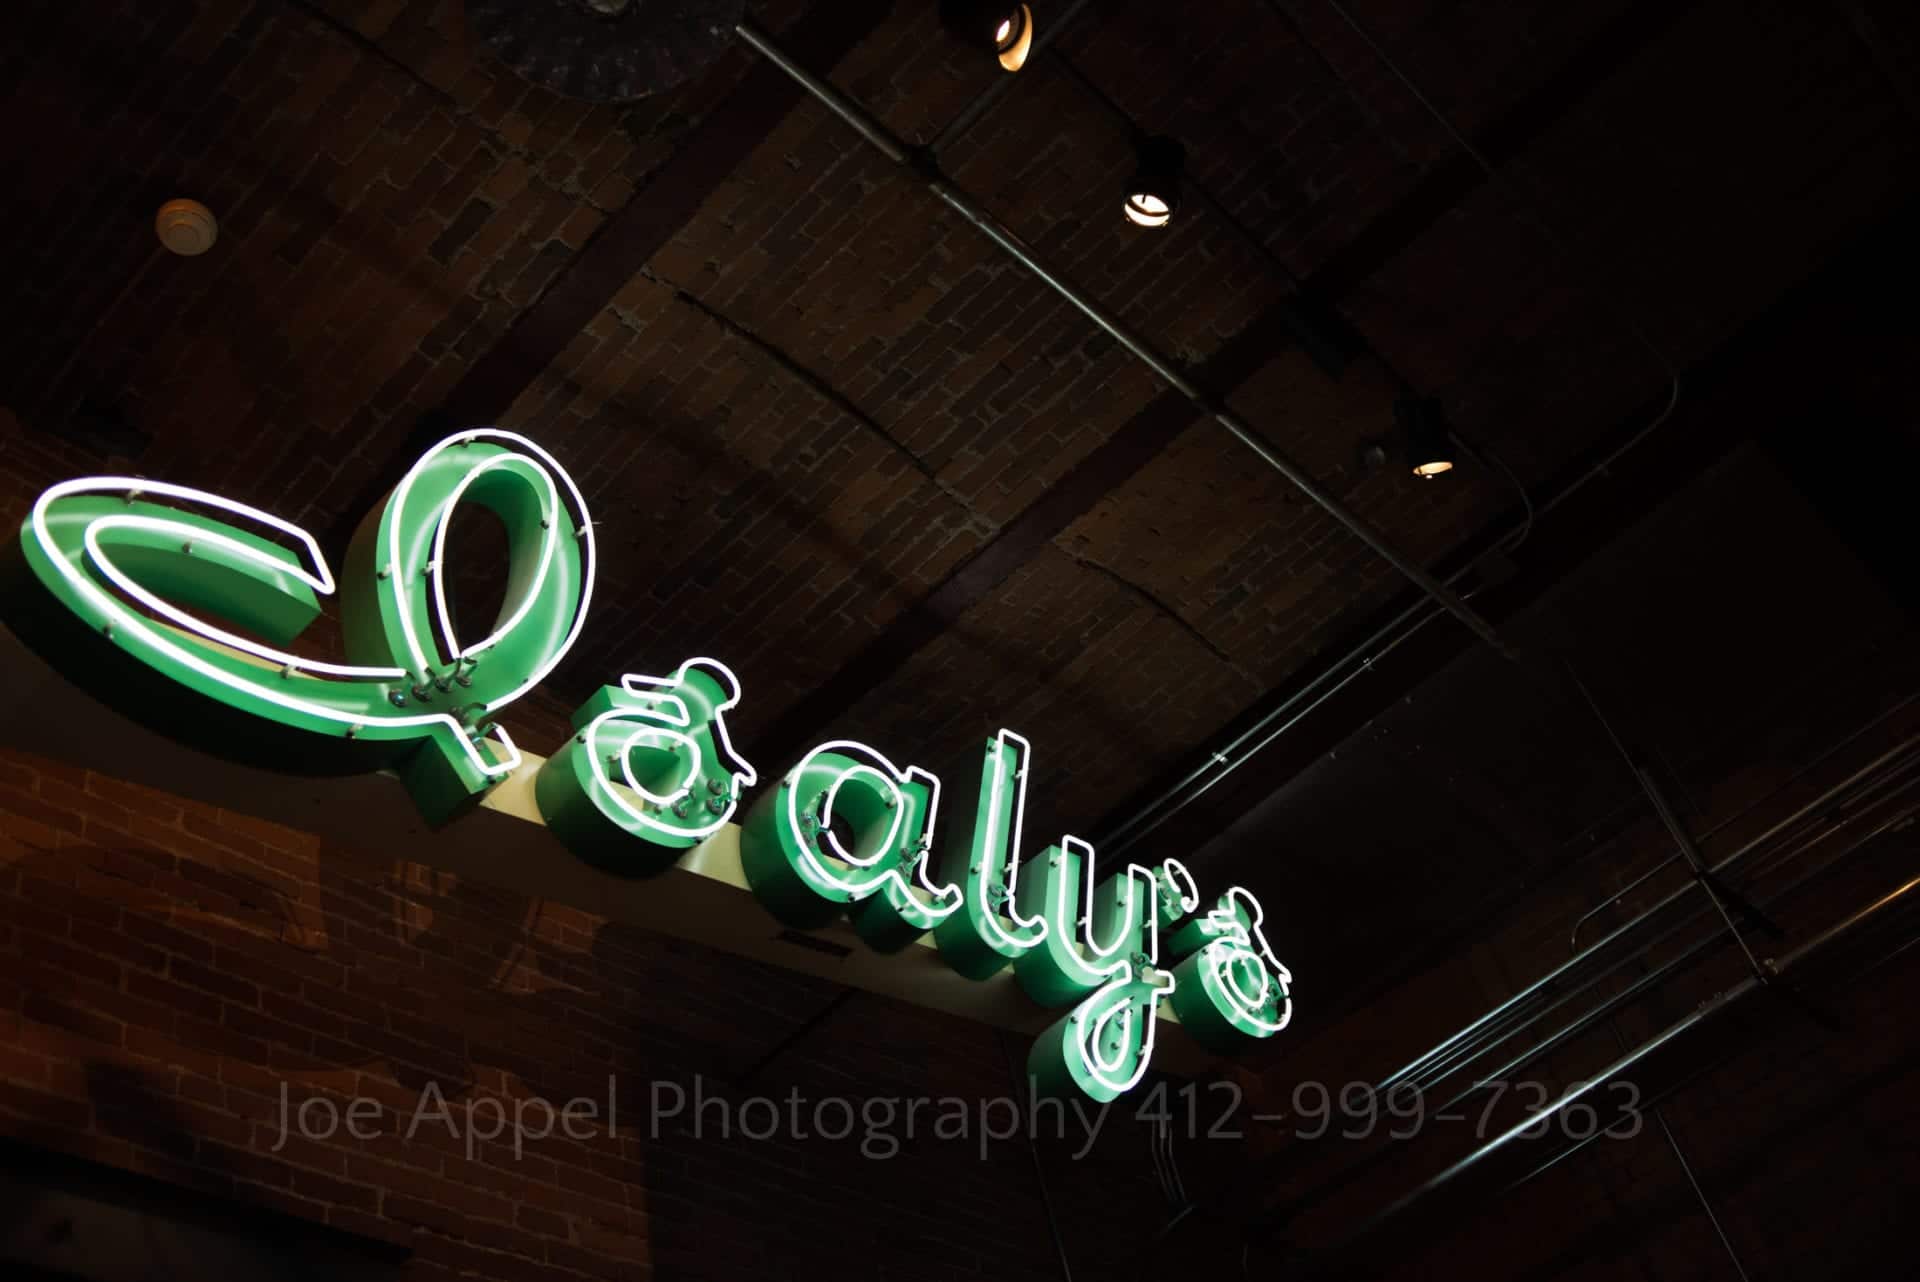 Green neon Isaly's sign in the Great Hall at the Heinz History Center